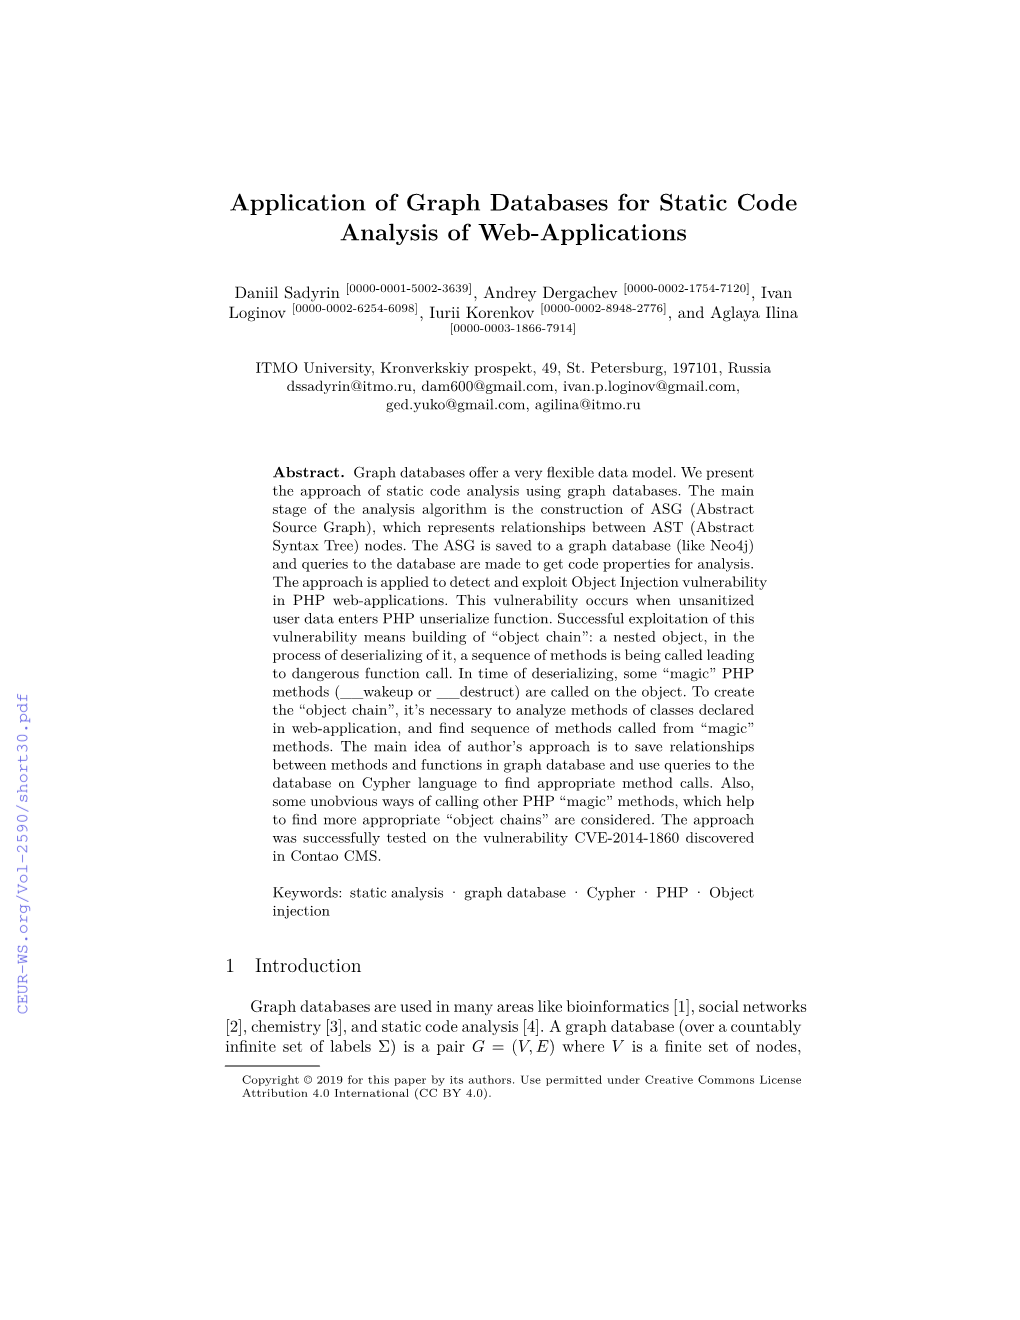 Application of Graph Databases for Static Code Analysis of Web-Applications